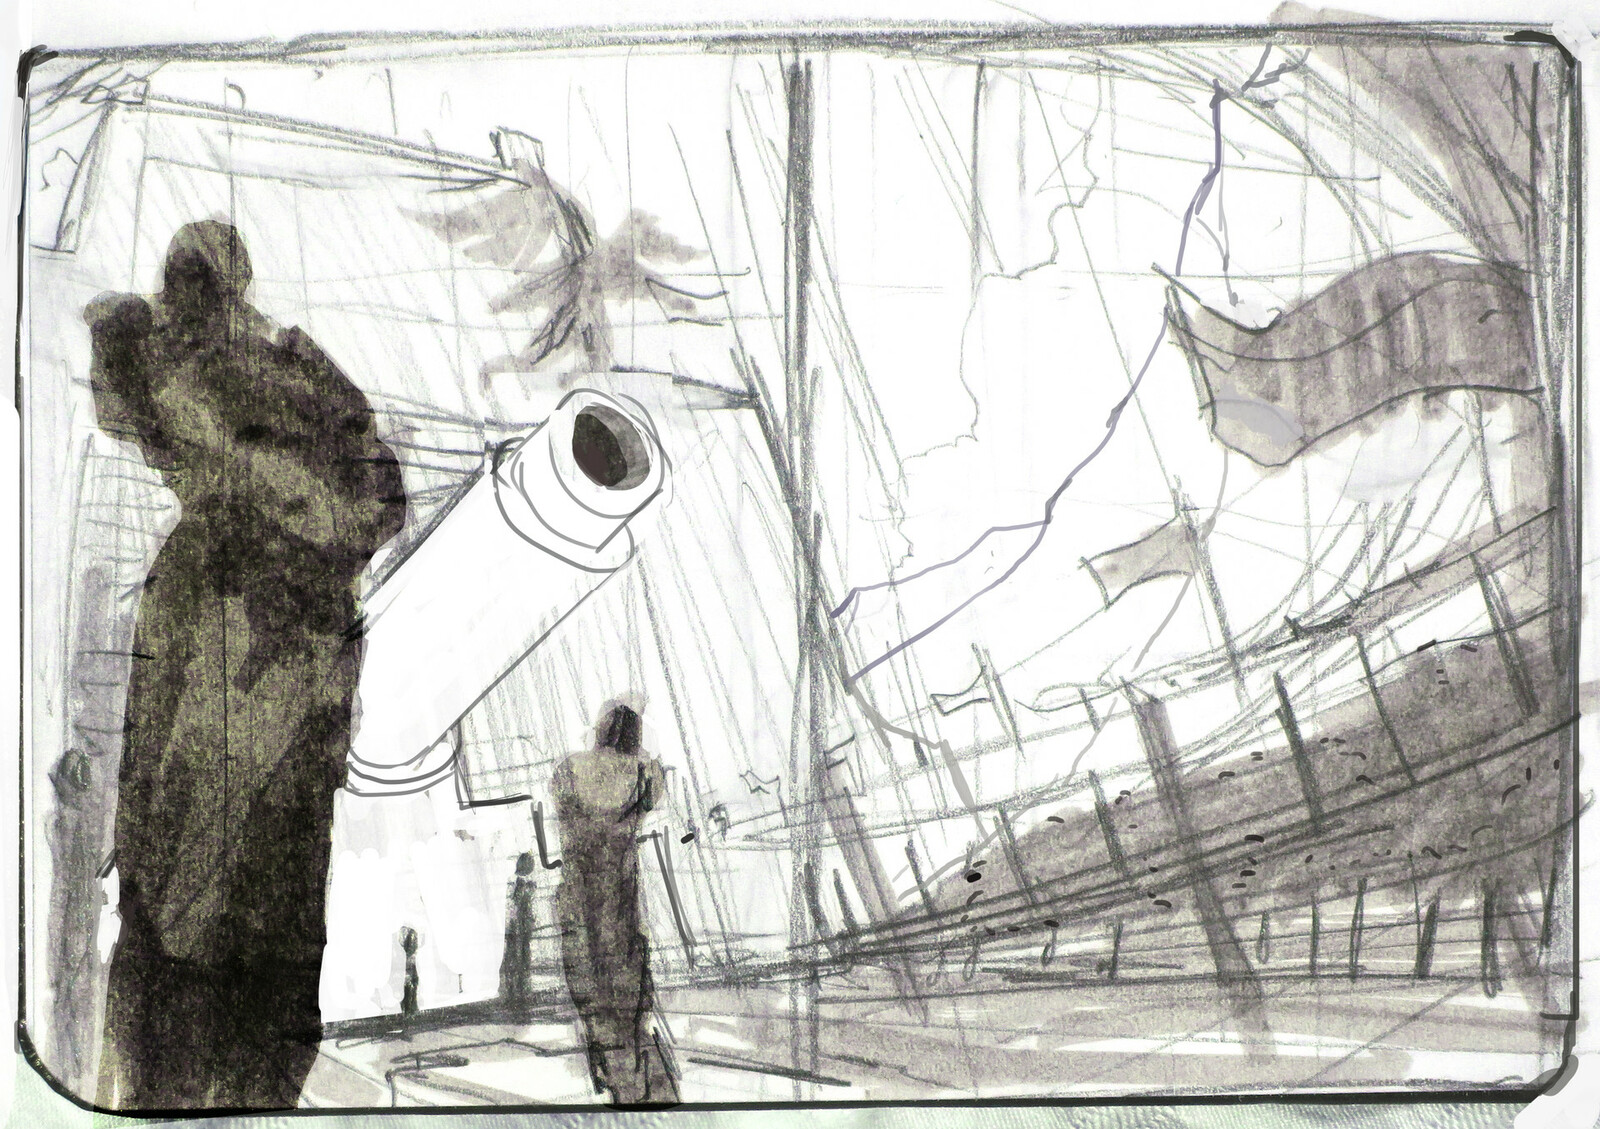 Composition sketch, I decided to reduce the importance of the cannon.